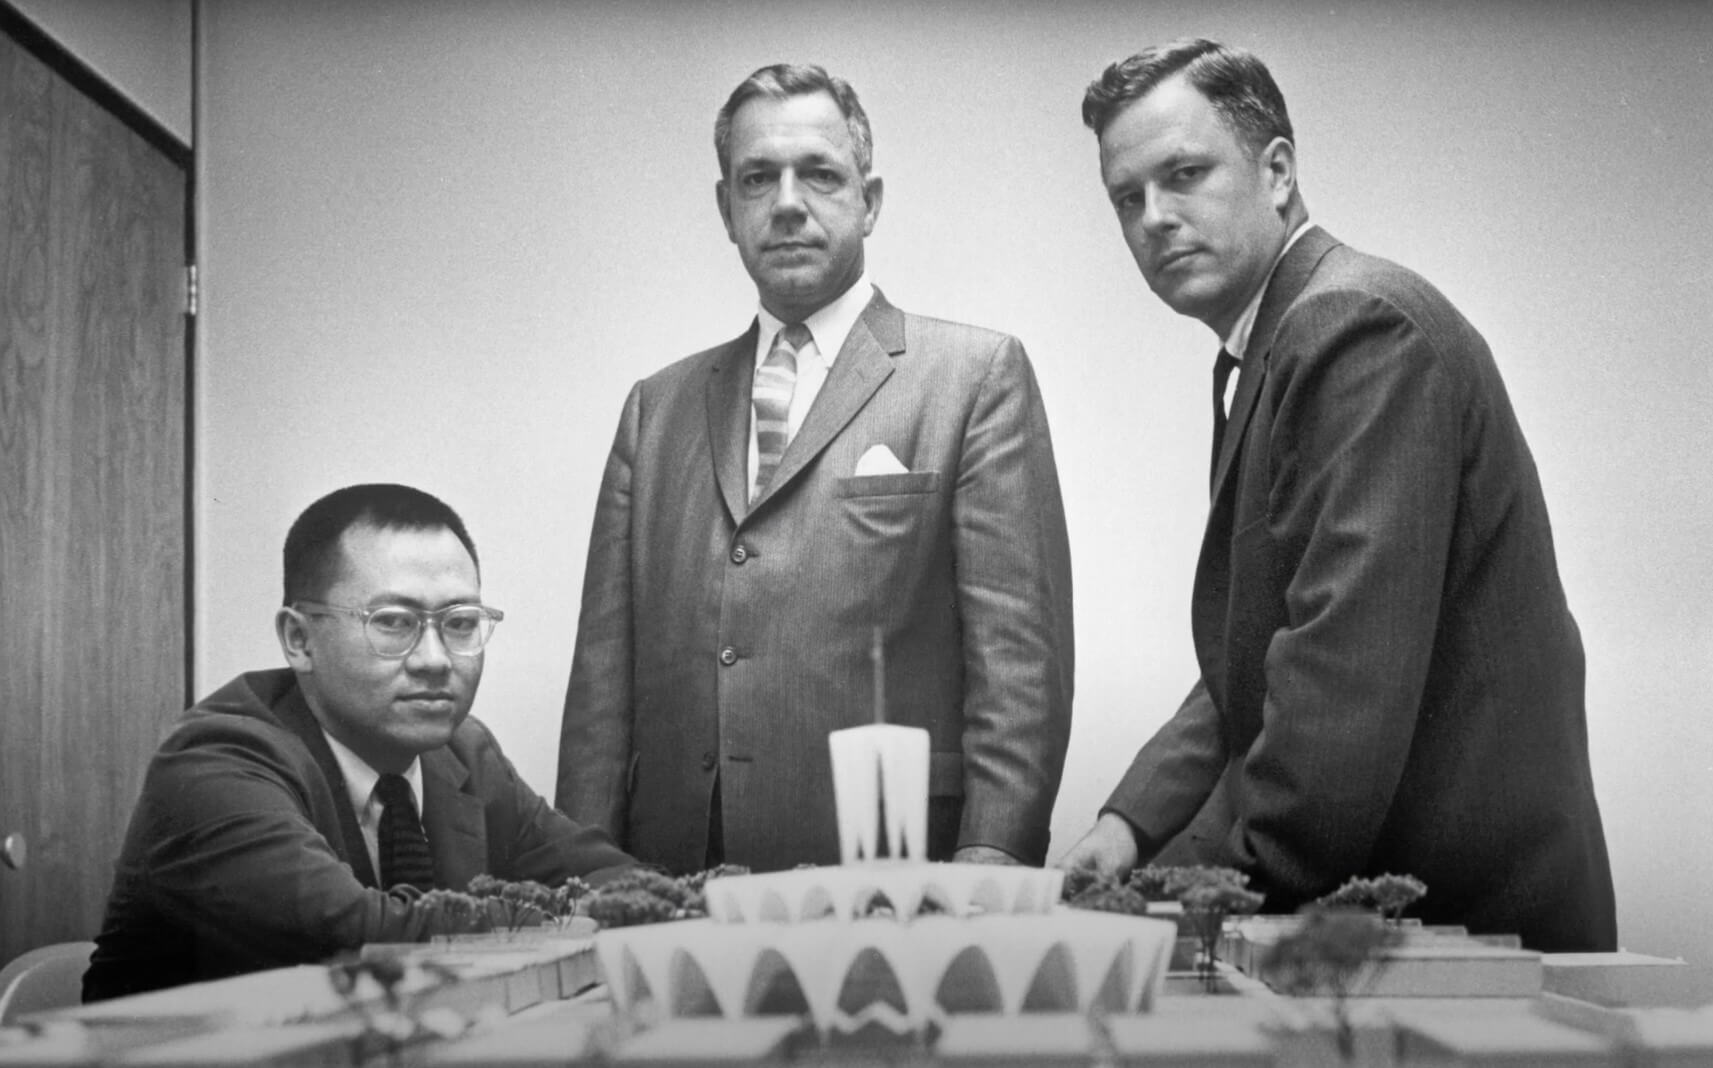 archival photo of three architects posing next to a model